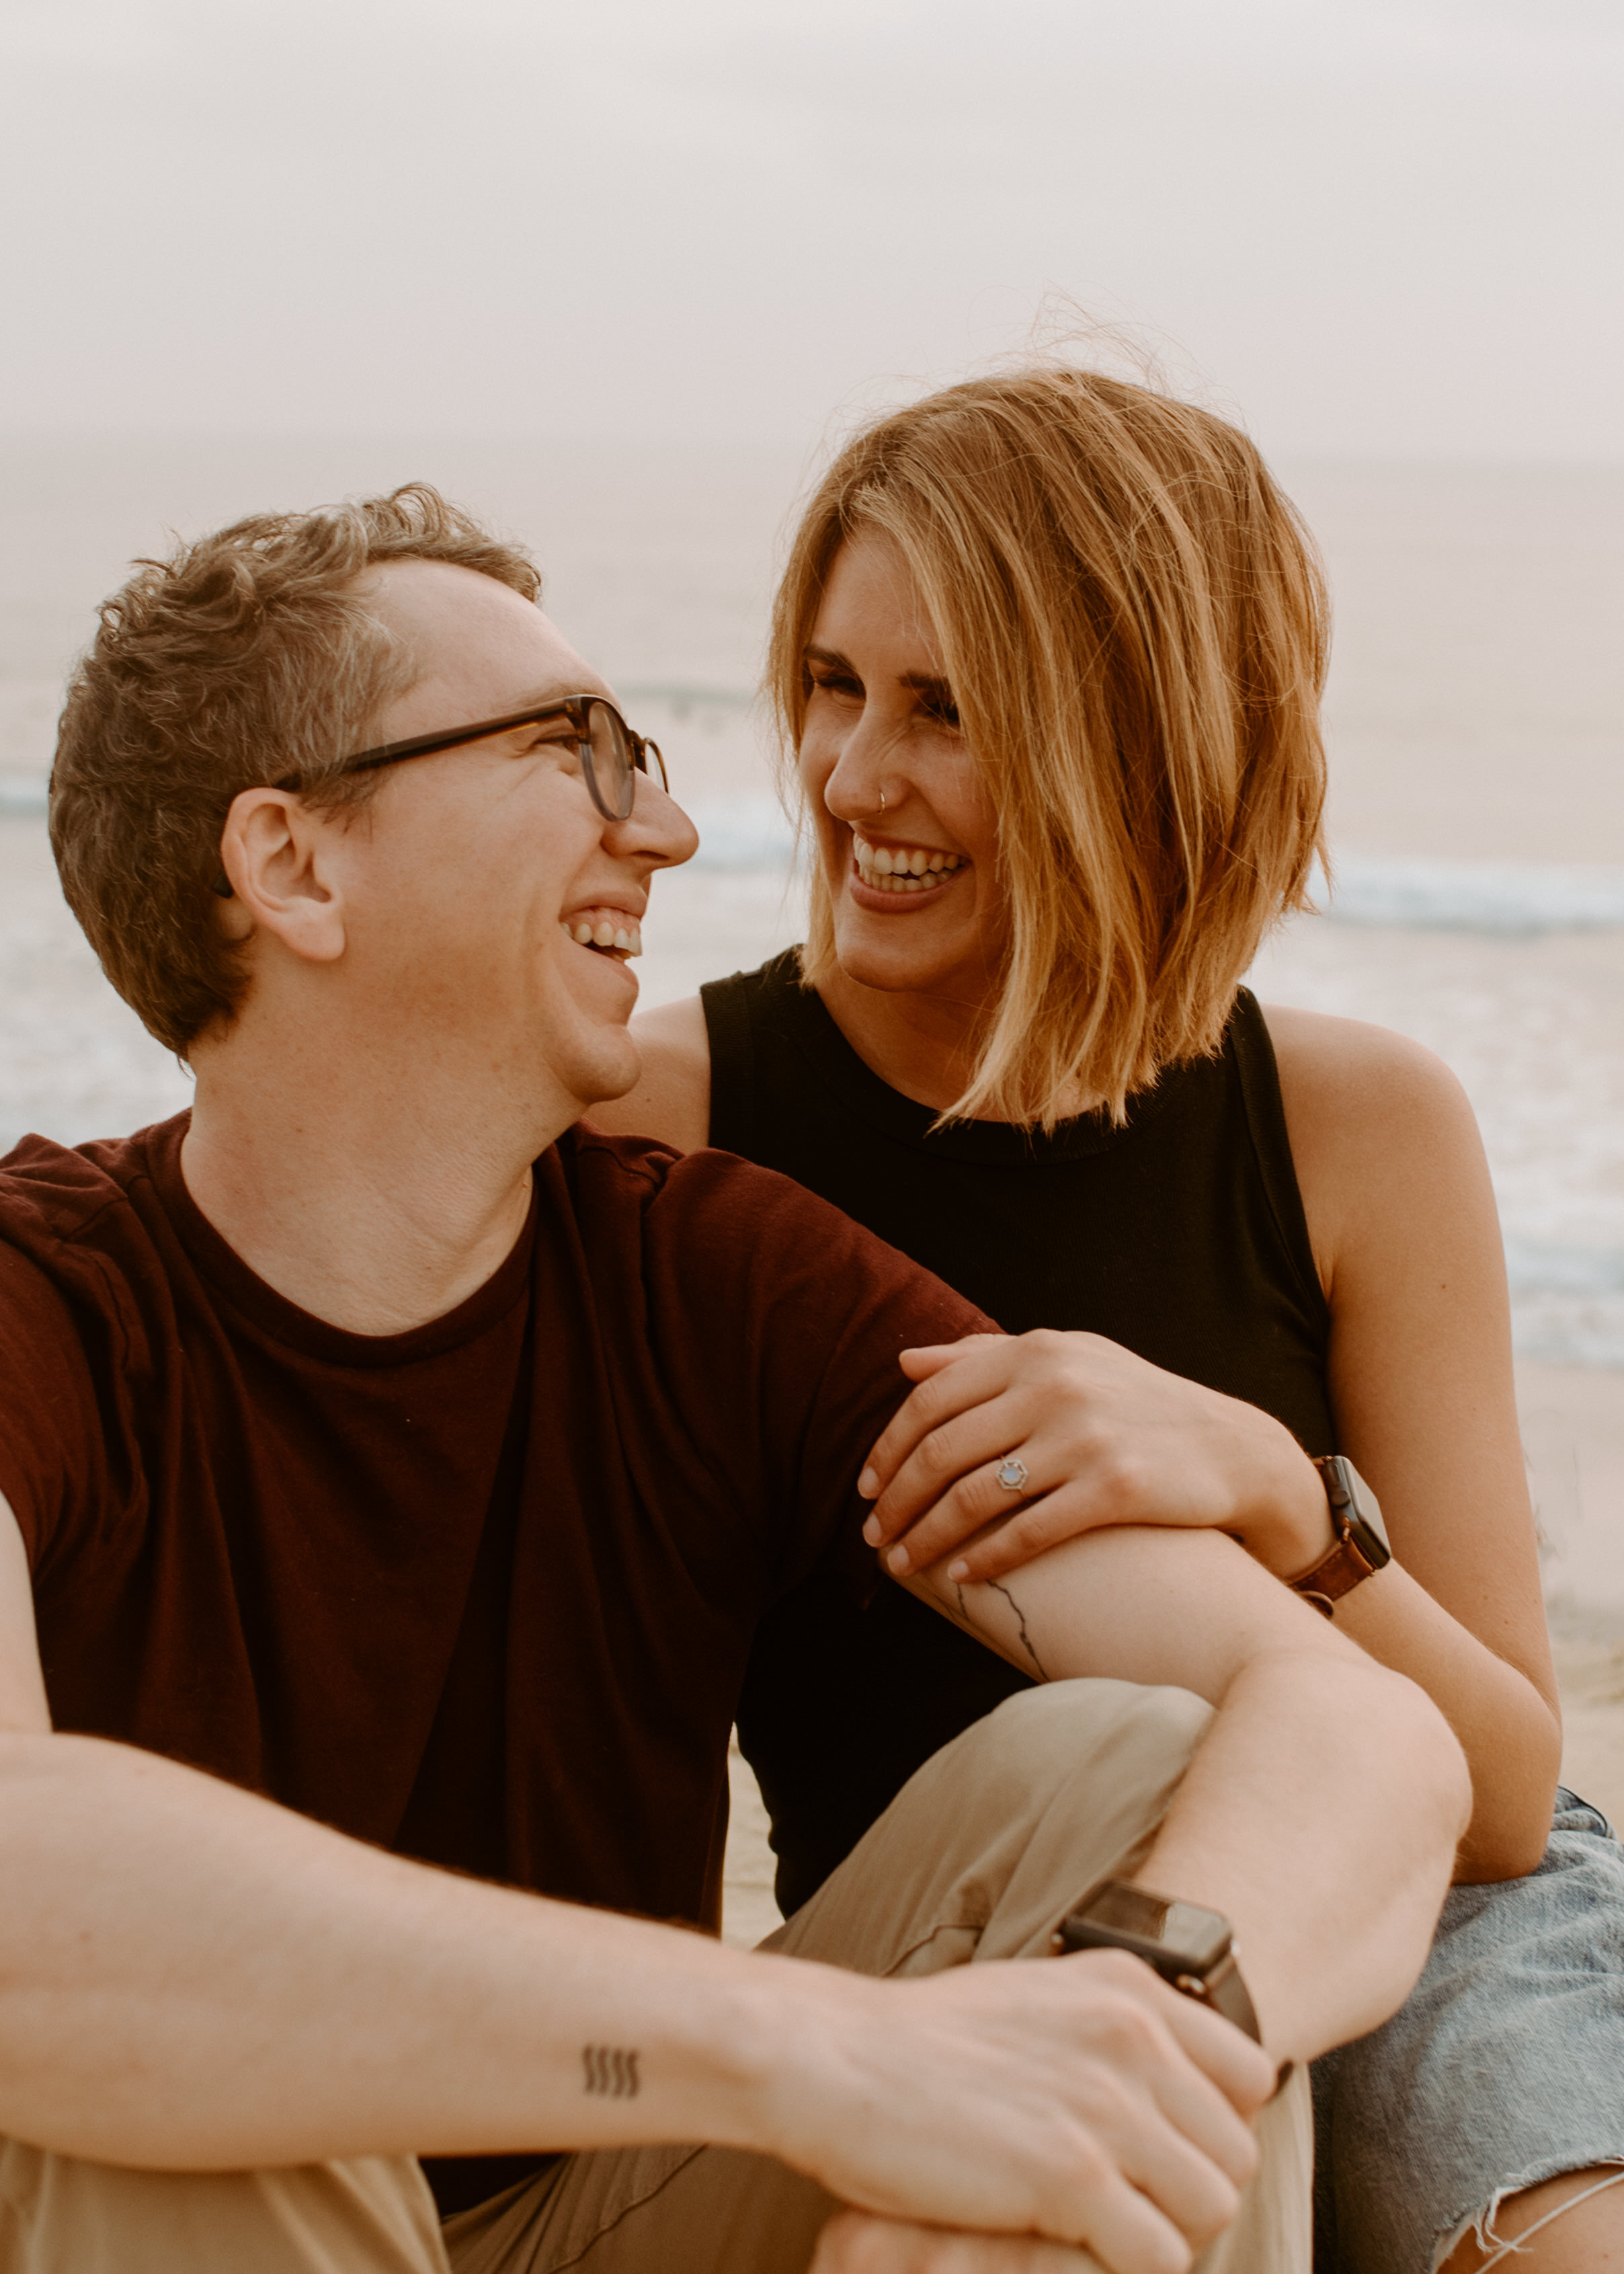 Torrey Pines Couples Photos | San Diego Beach Engagement Session 